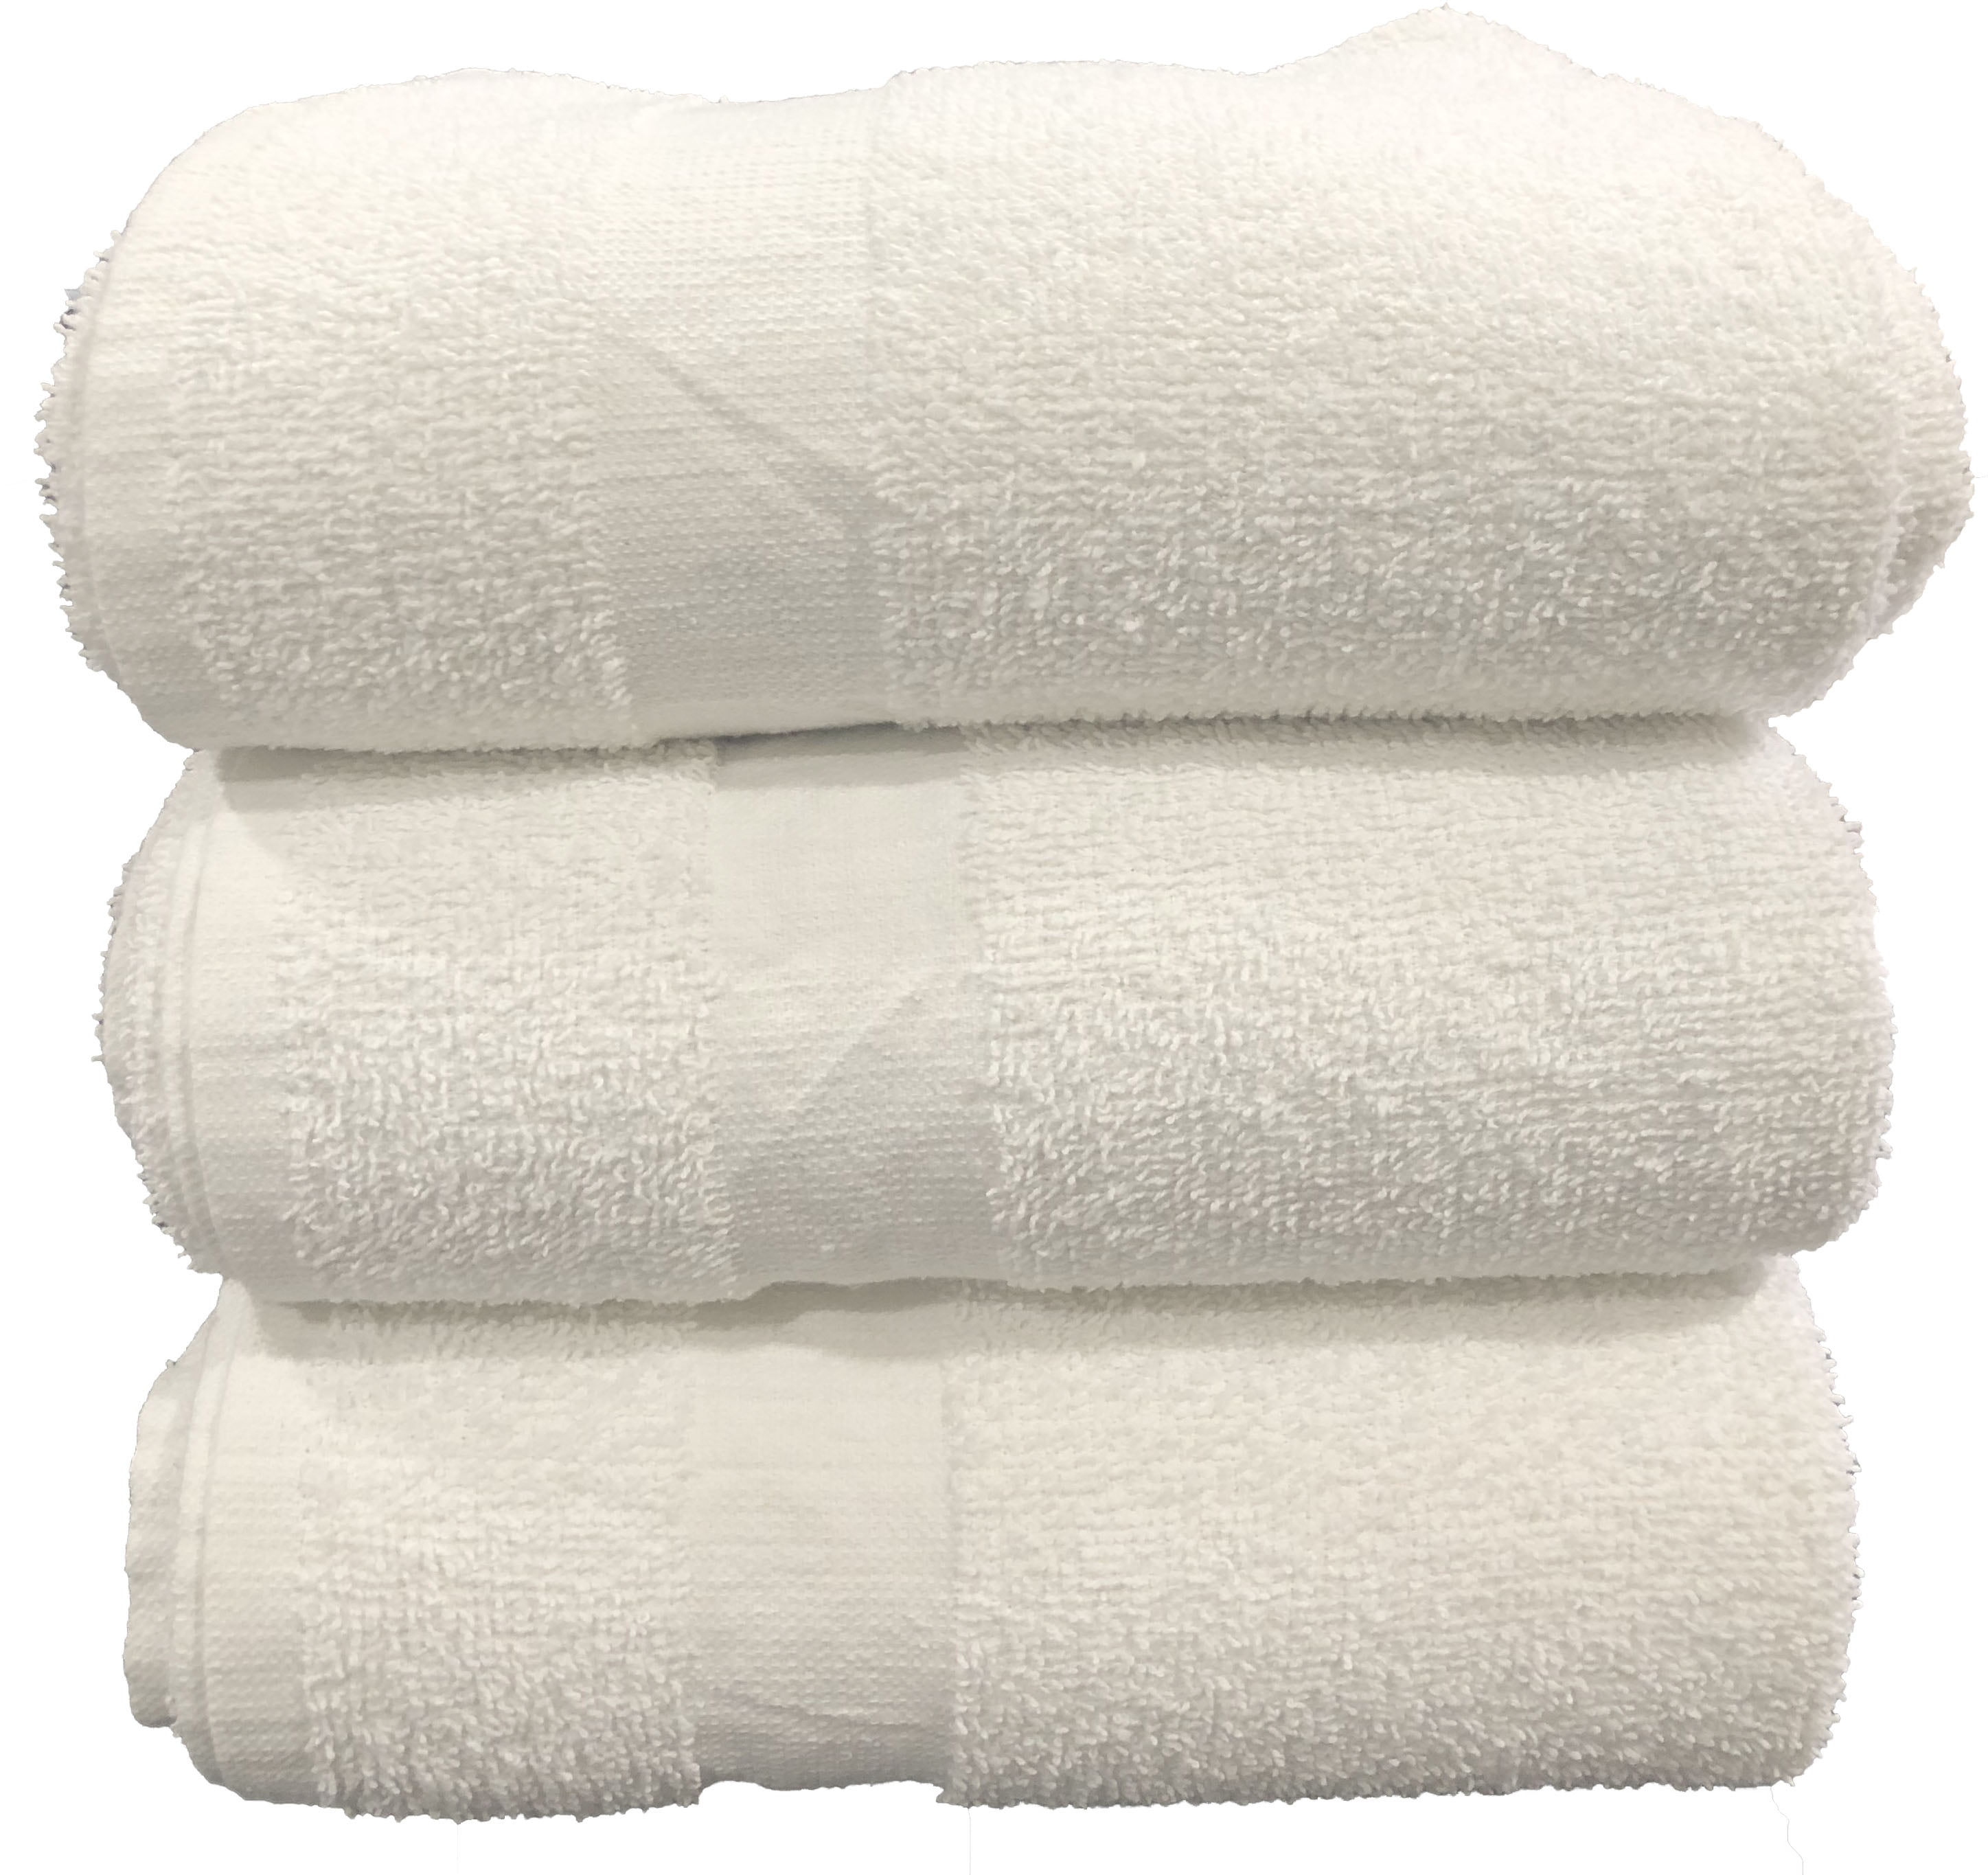 10 dozen white bath towel 24x48 hotel spa and home washable royal touch brand 